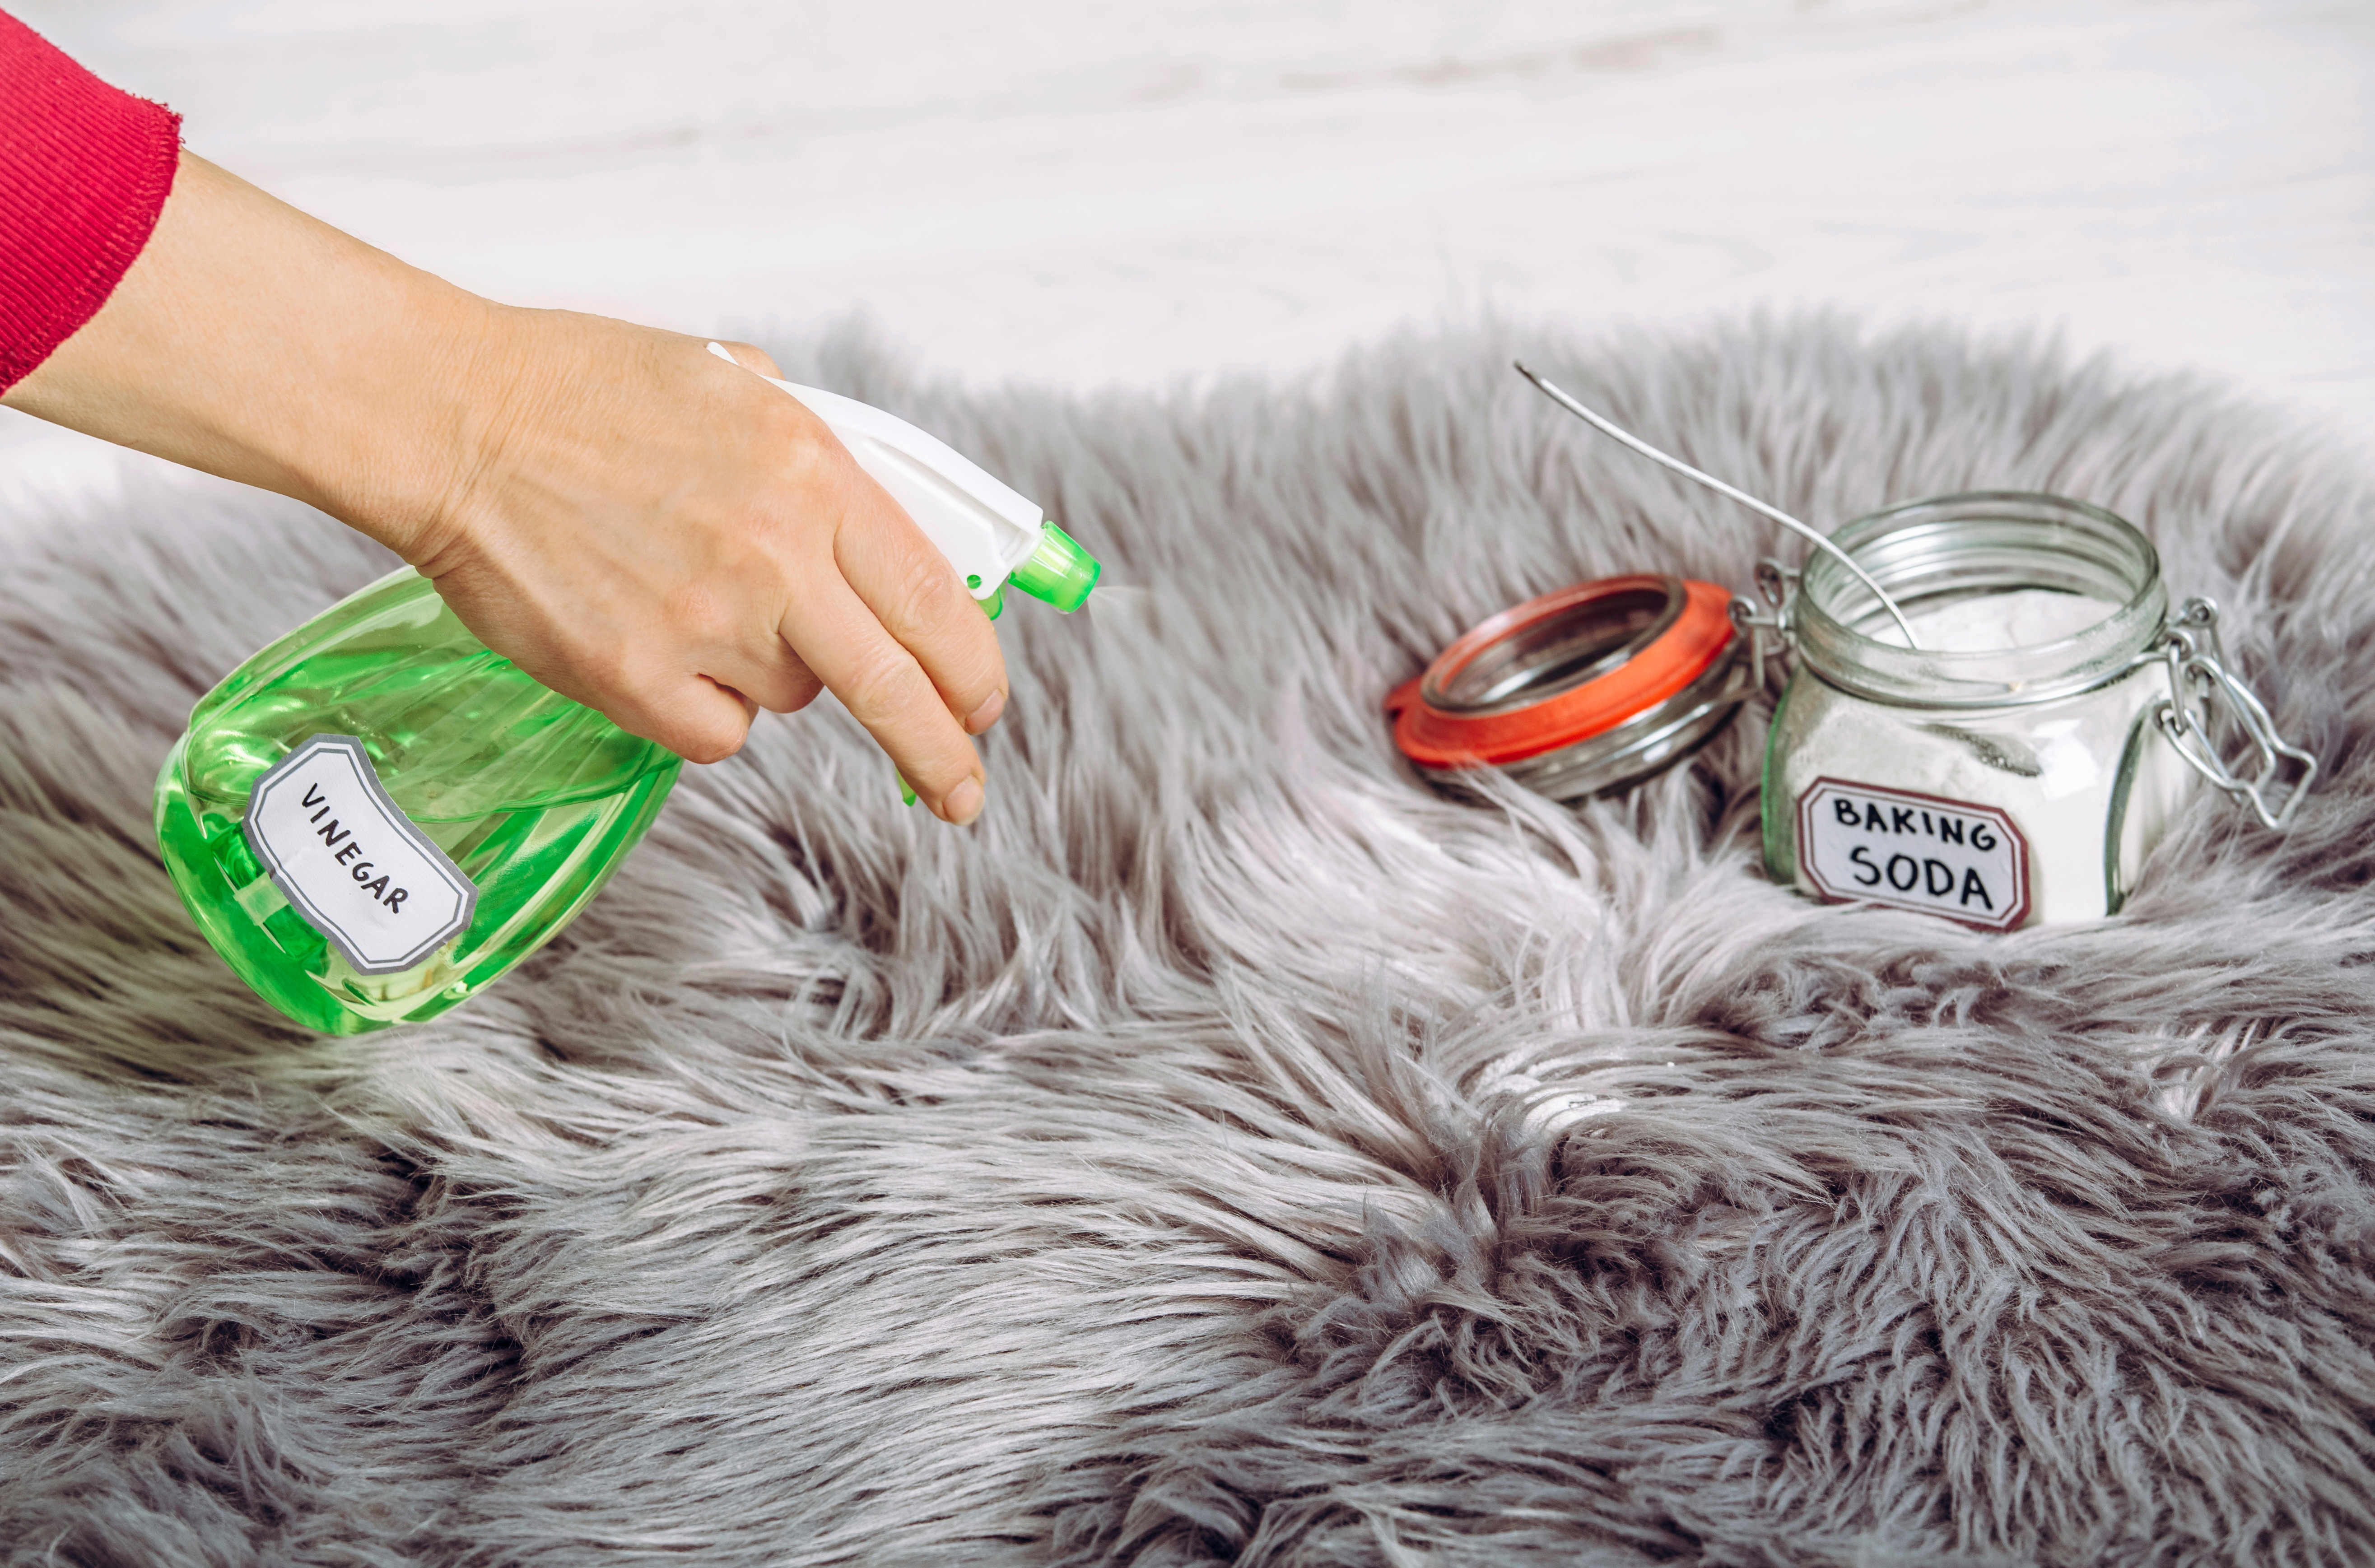 A woman using white vinegar diluted with water and baking soda to clean a faux fur rug | Source: Shutterstock